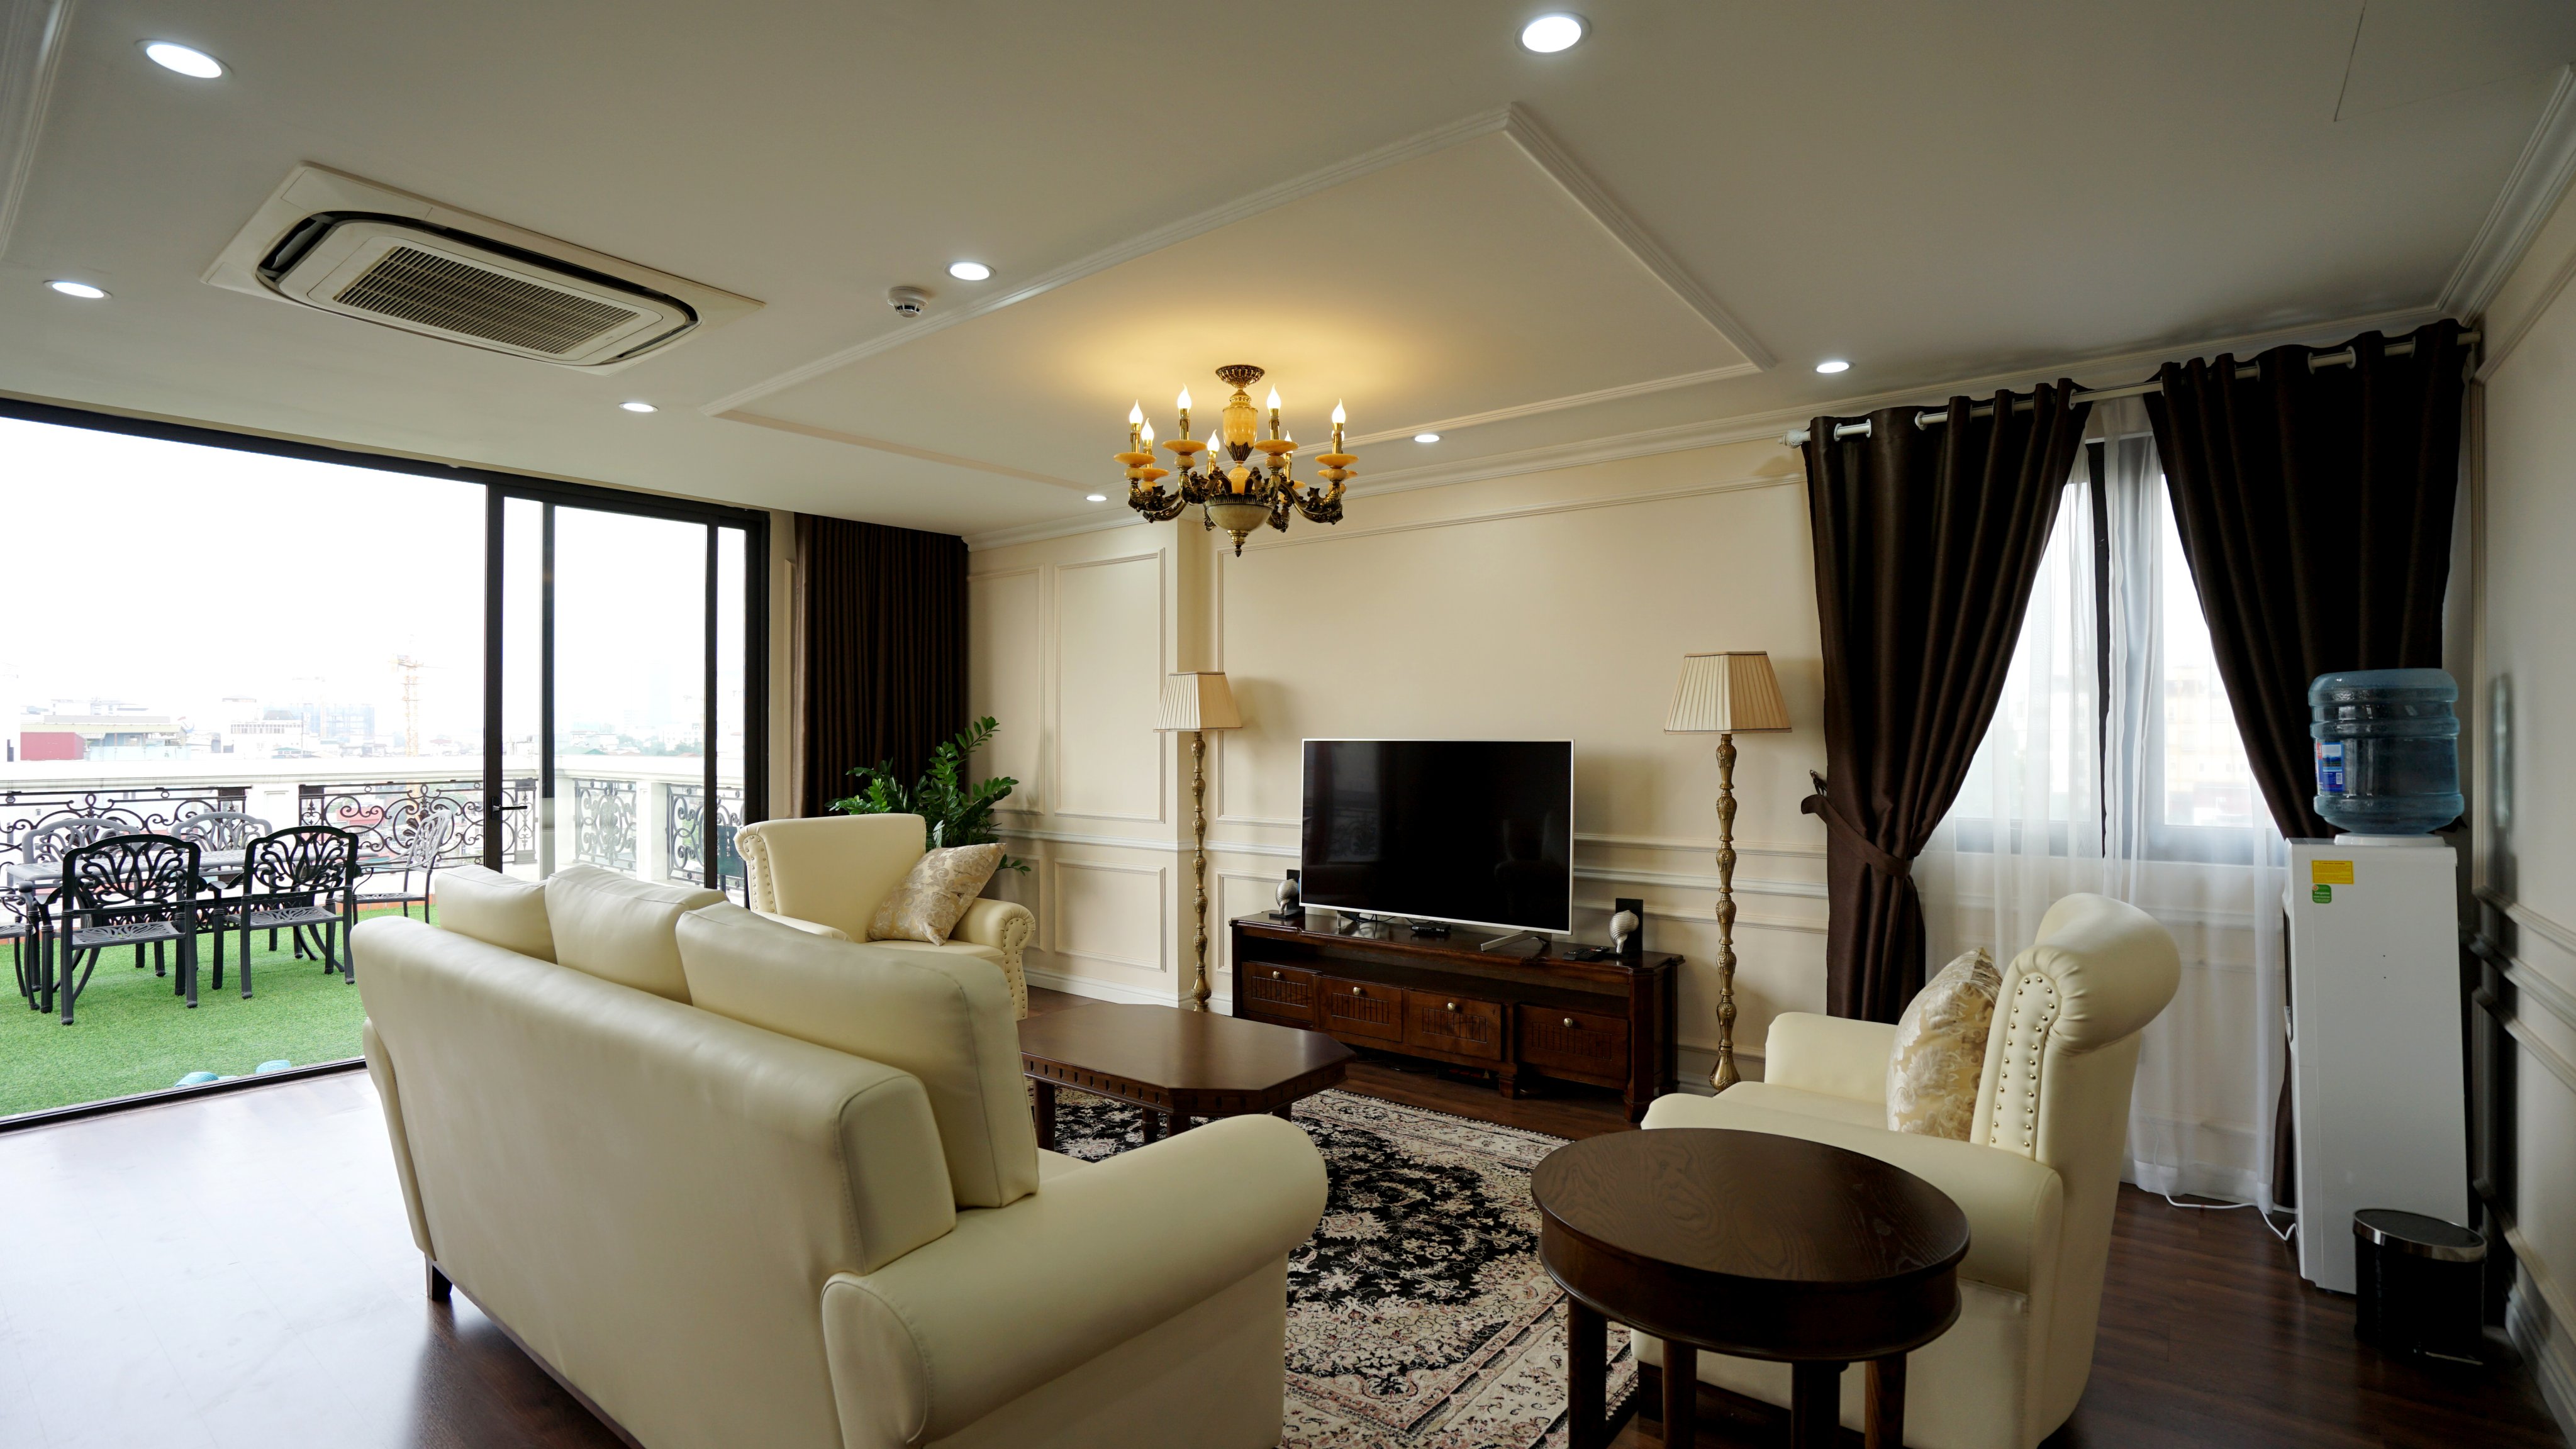 *Amazing 3 Bedroom Serviced Apartment For rent in Hai Ba Trung District, Big Balcony*